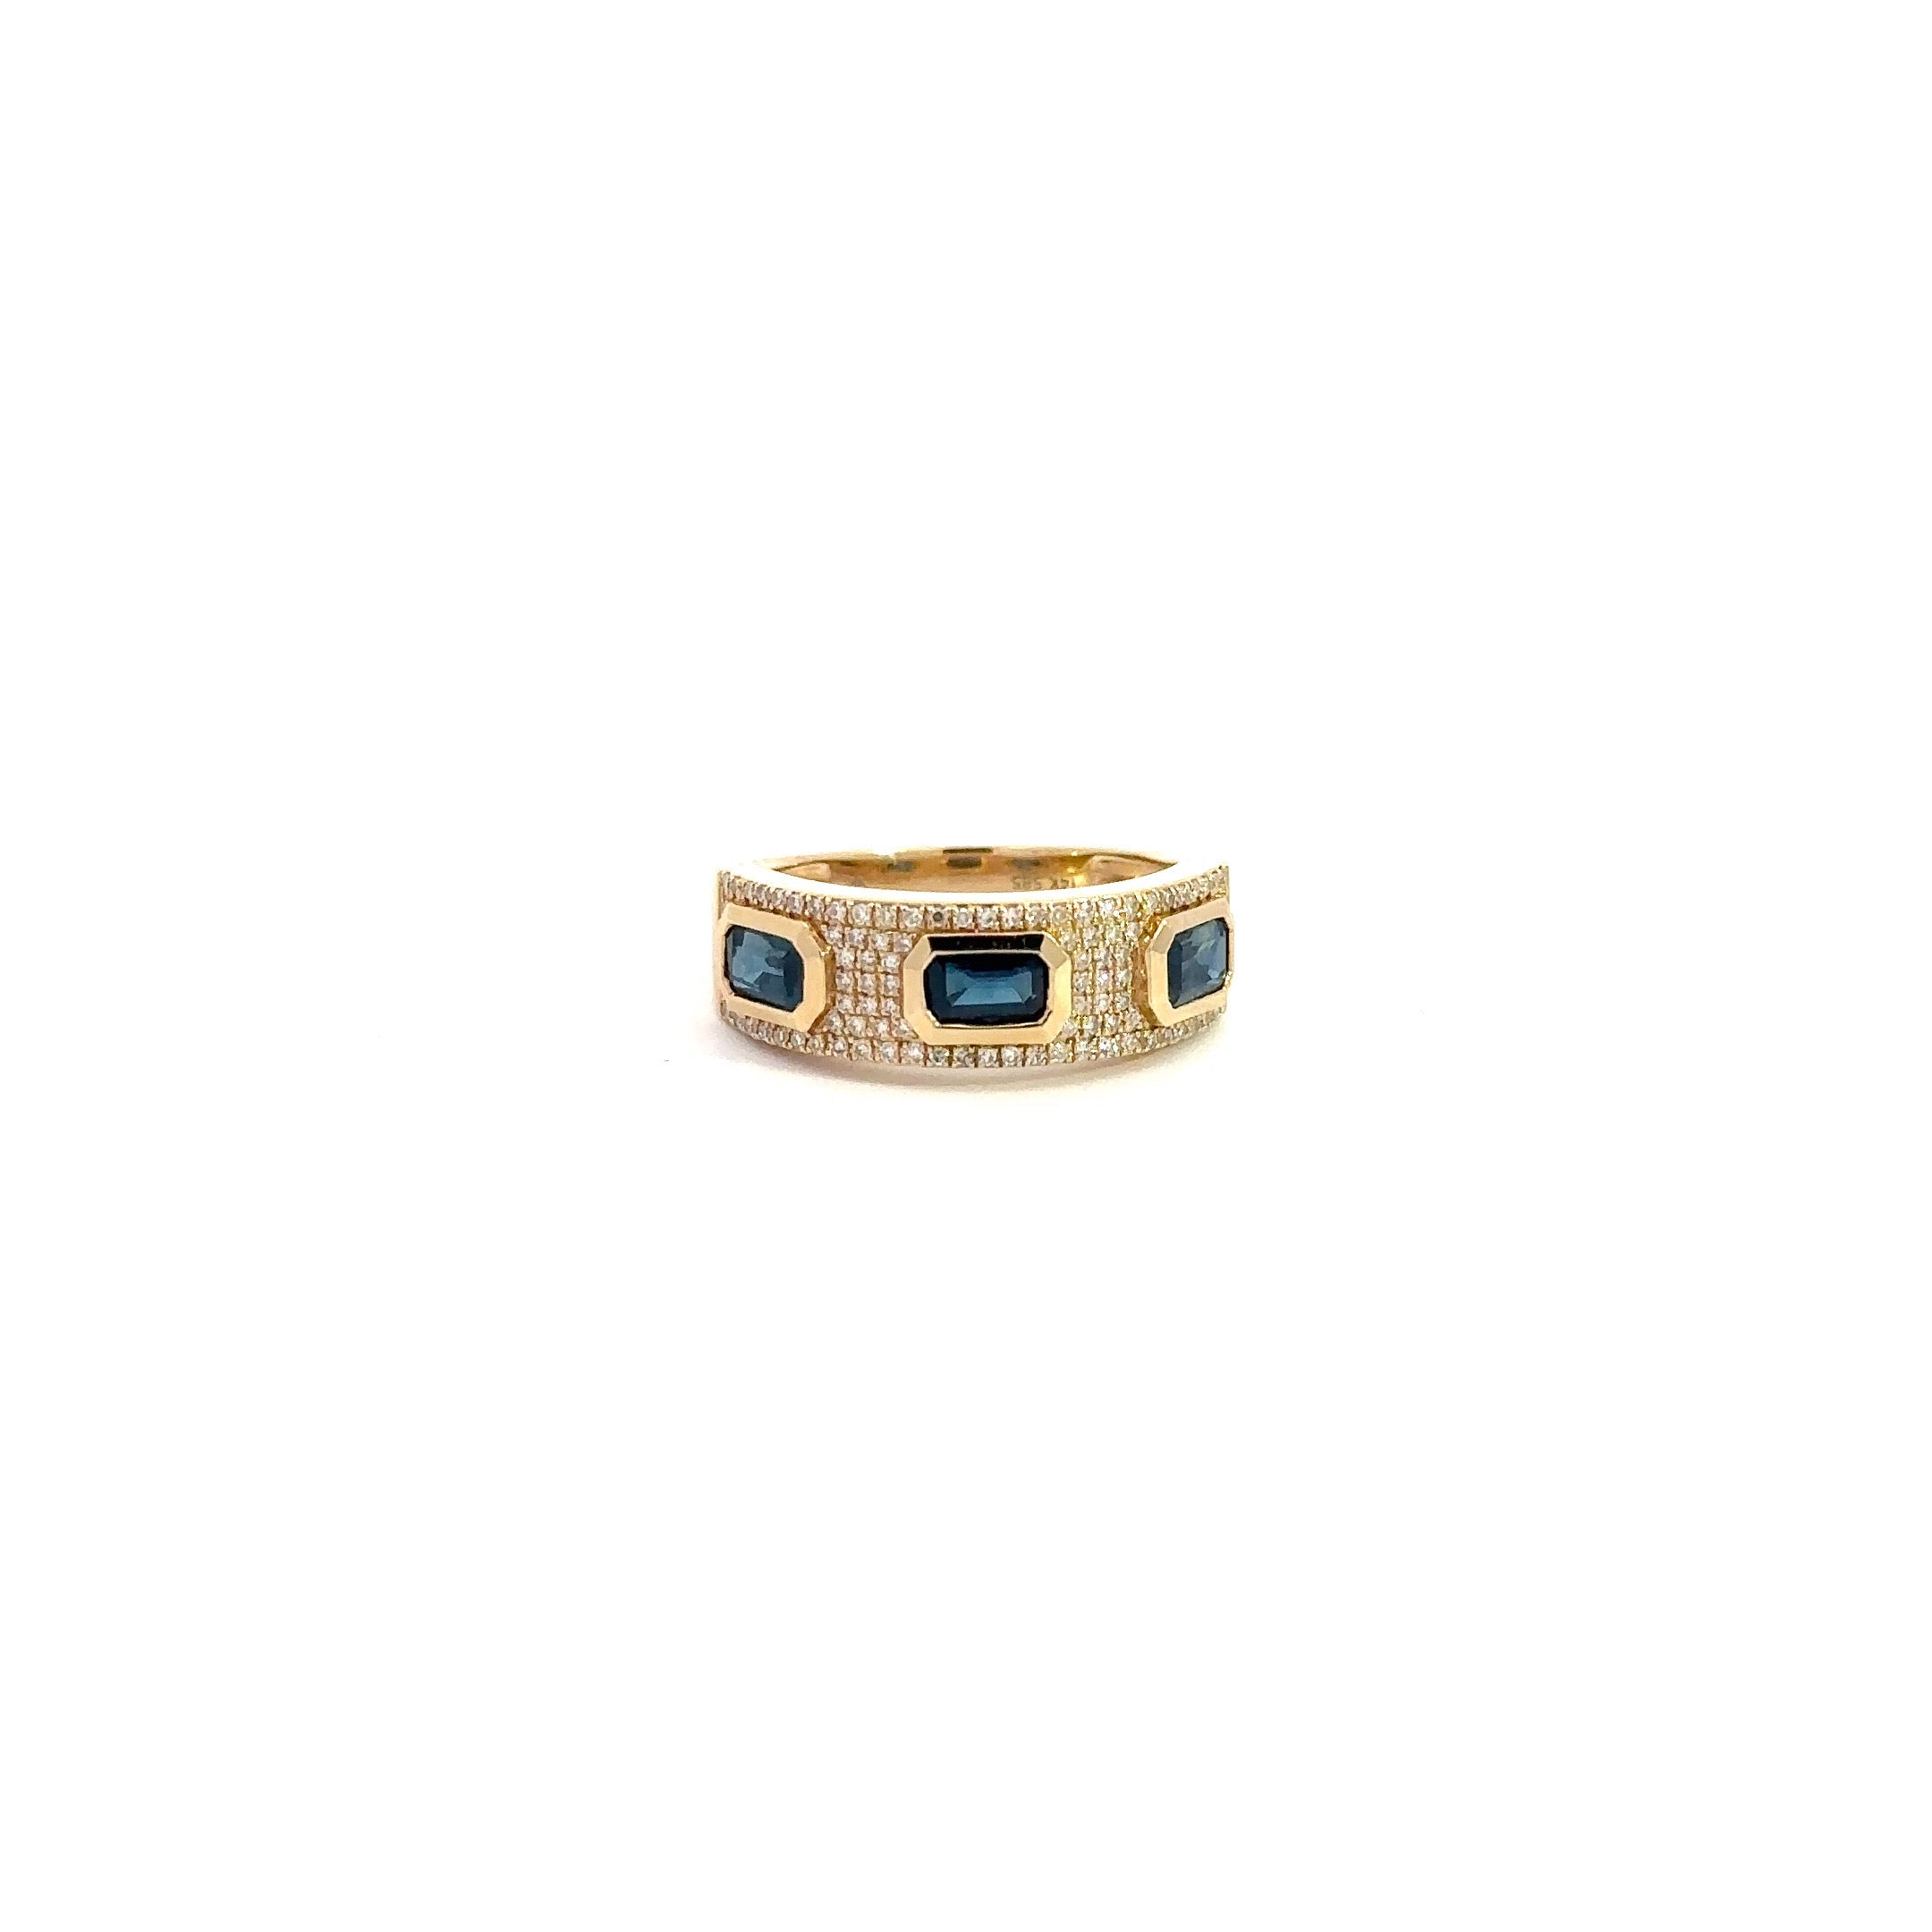 WD914 14kt gold, blue sapphire and diamond ring